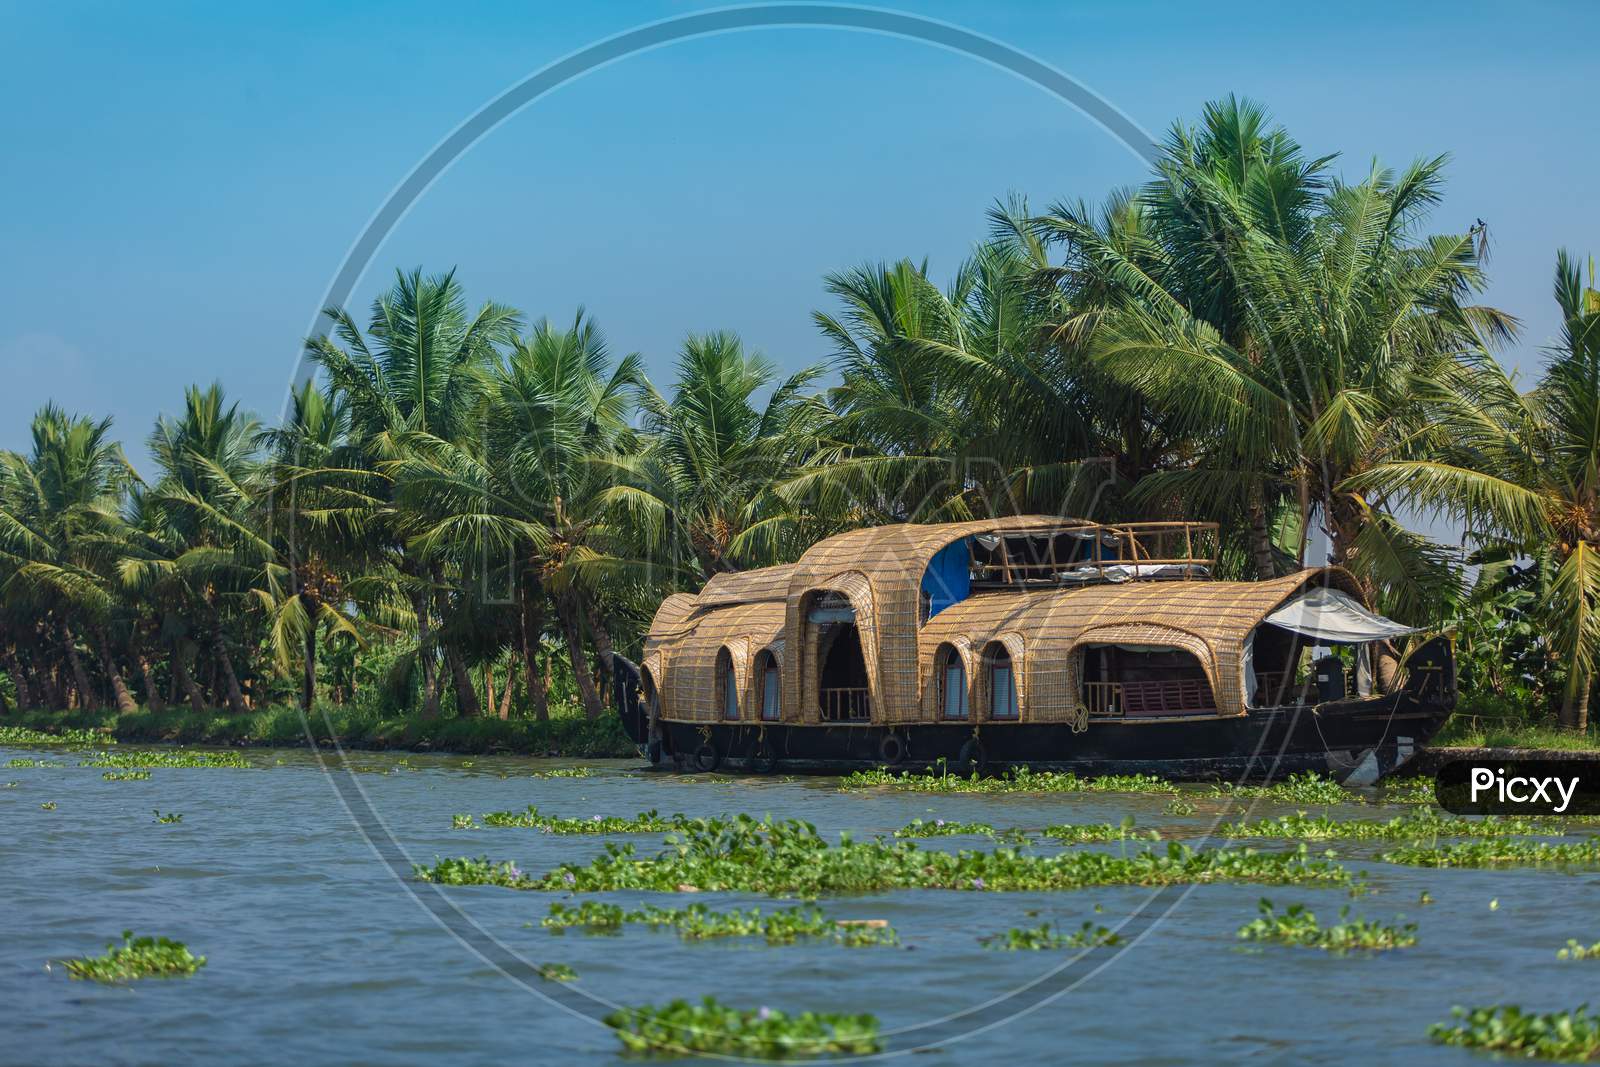 Houseboat in the backwaters of Indian state called Kerala.